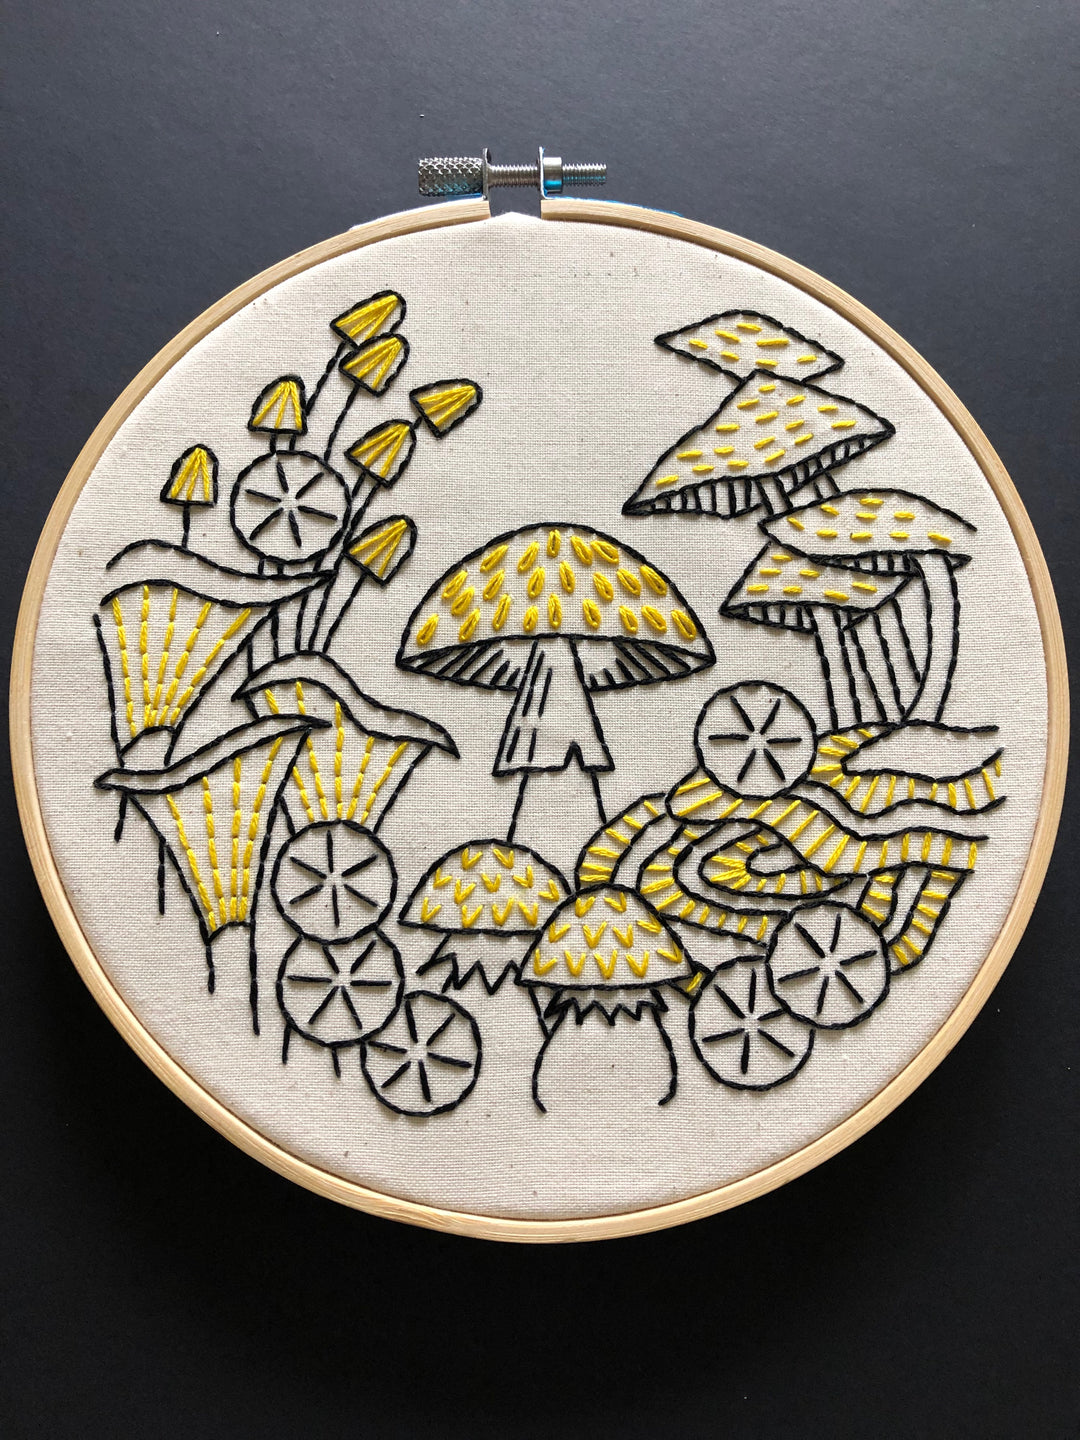 Craftermoon - Mushrooms Complete Embroidery Kit